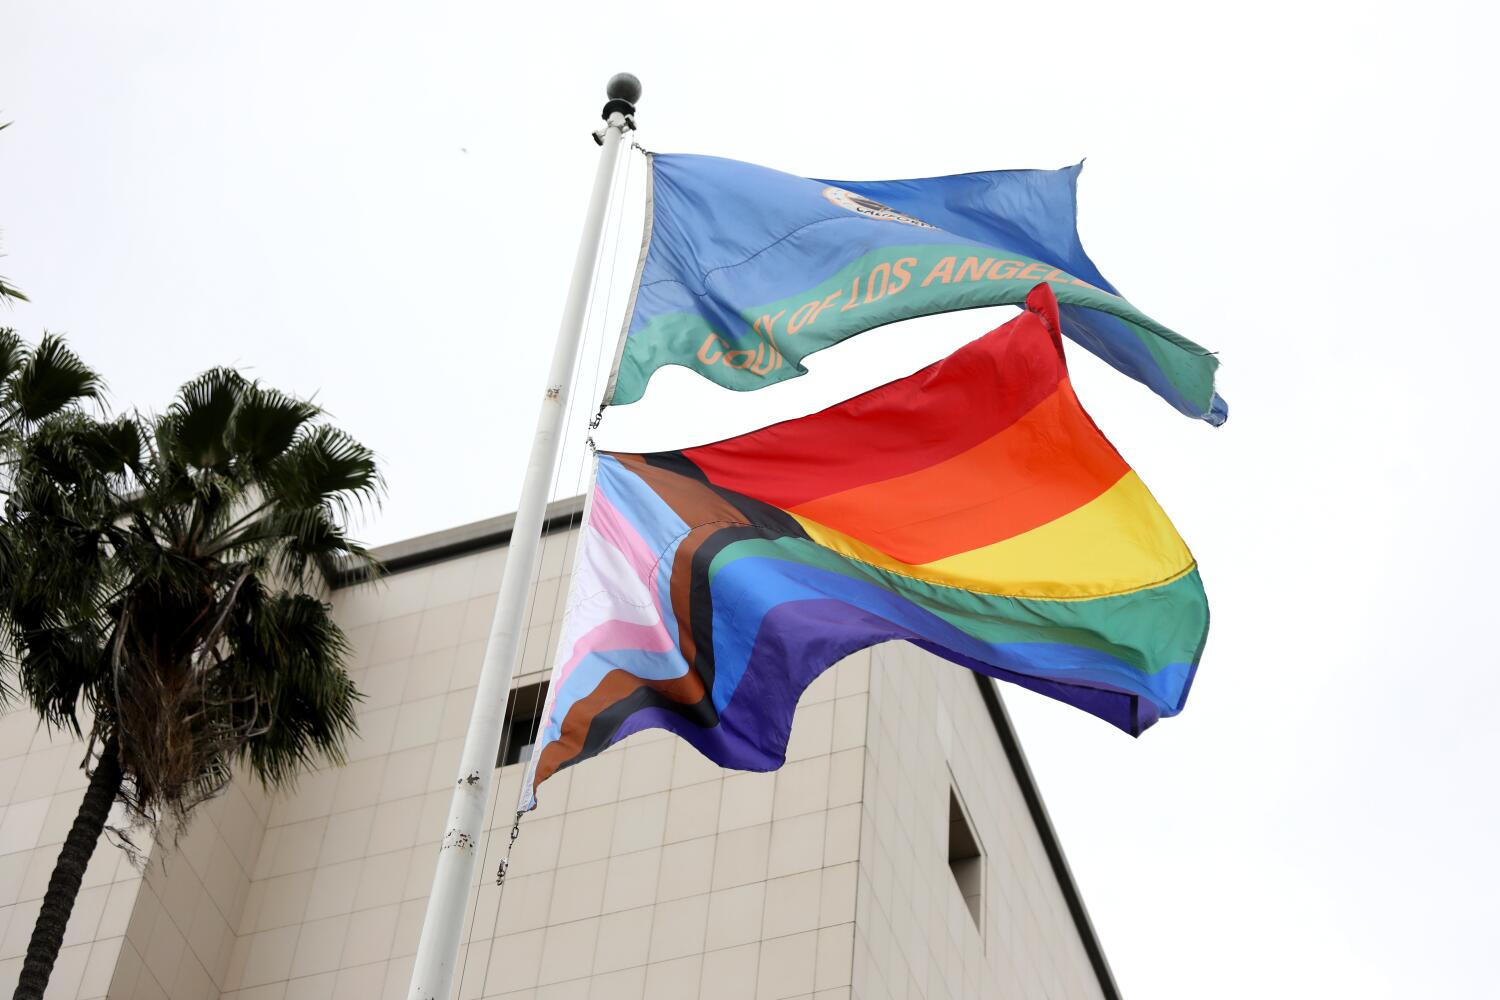 Downey reverses policy on flying Pride flag. Critics call it 